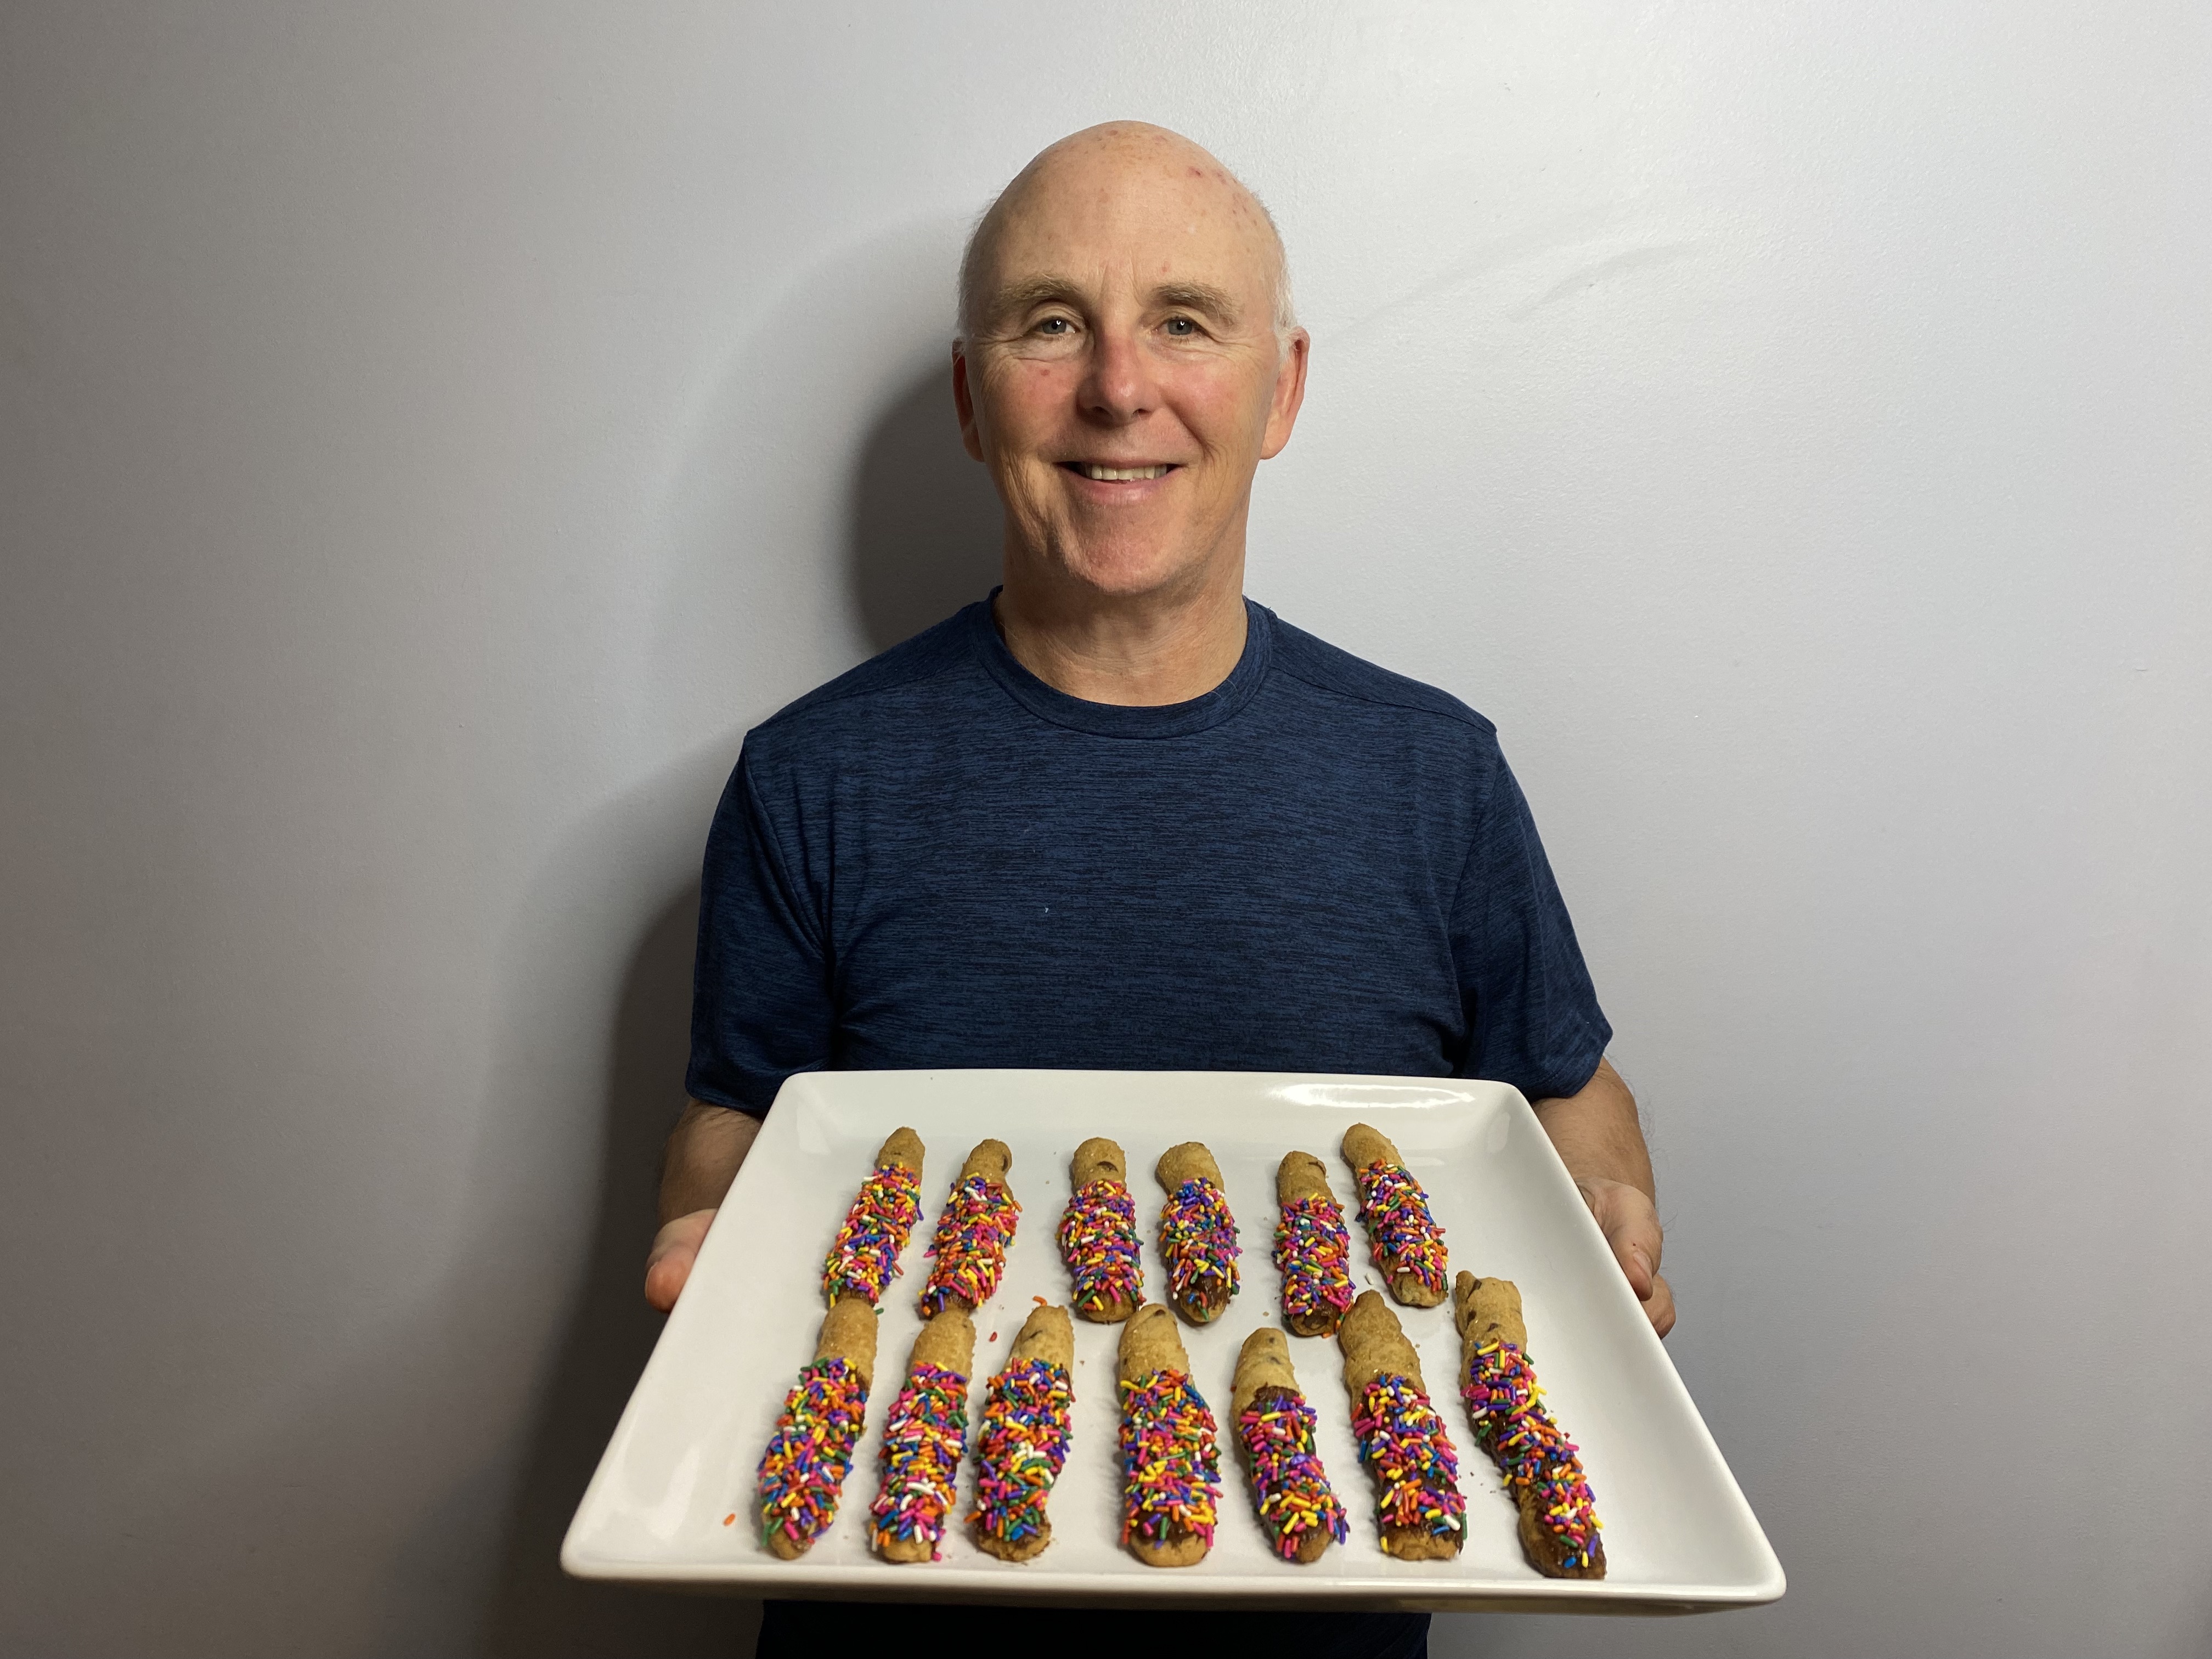 A photo of Chef Rob holding a plate of Sprinkled Cookie Sticks.